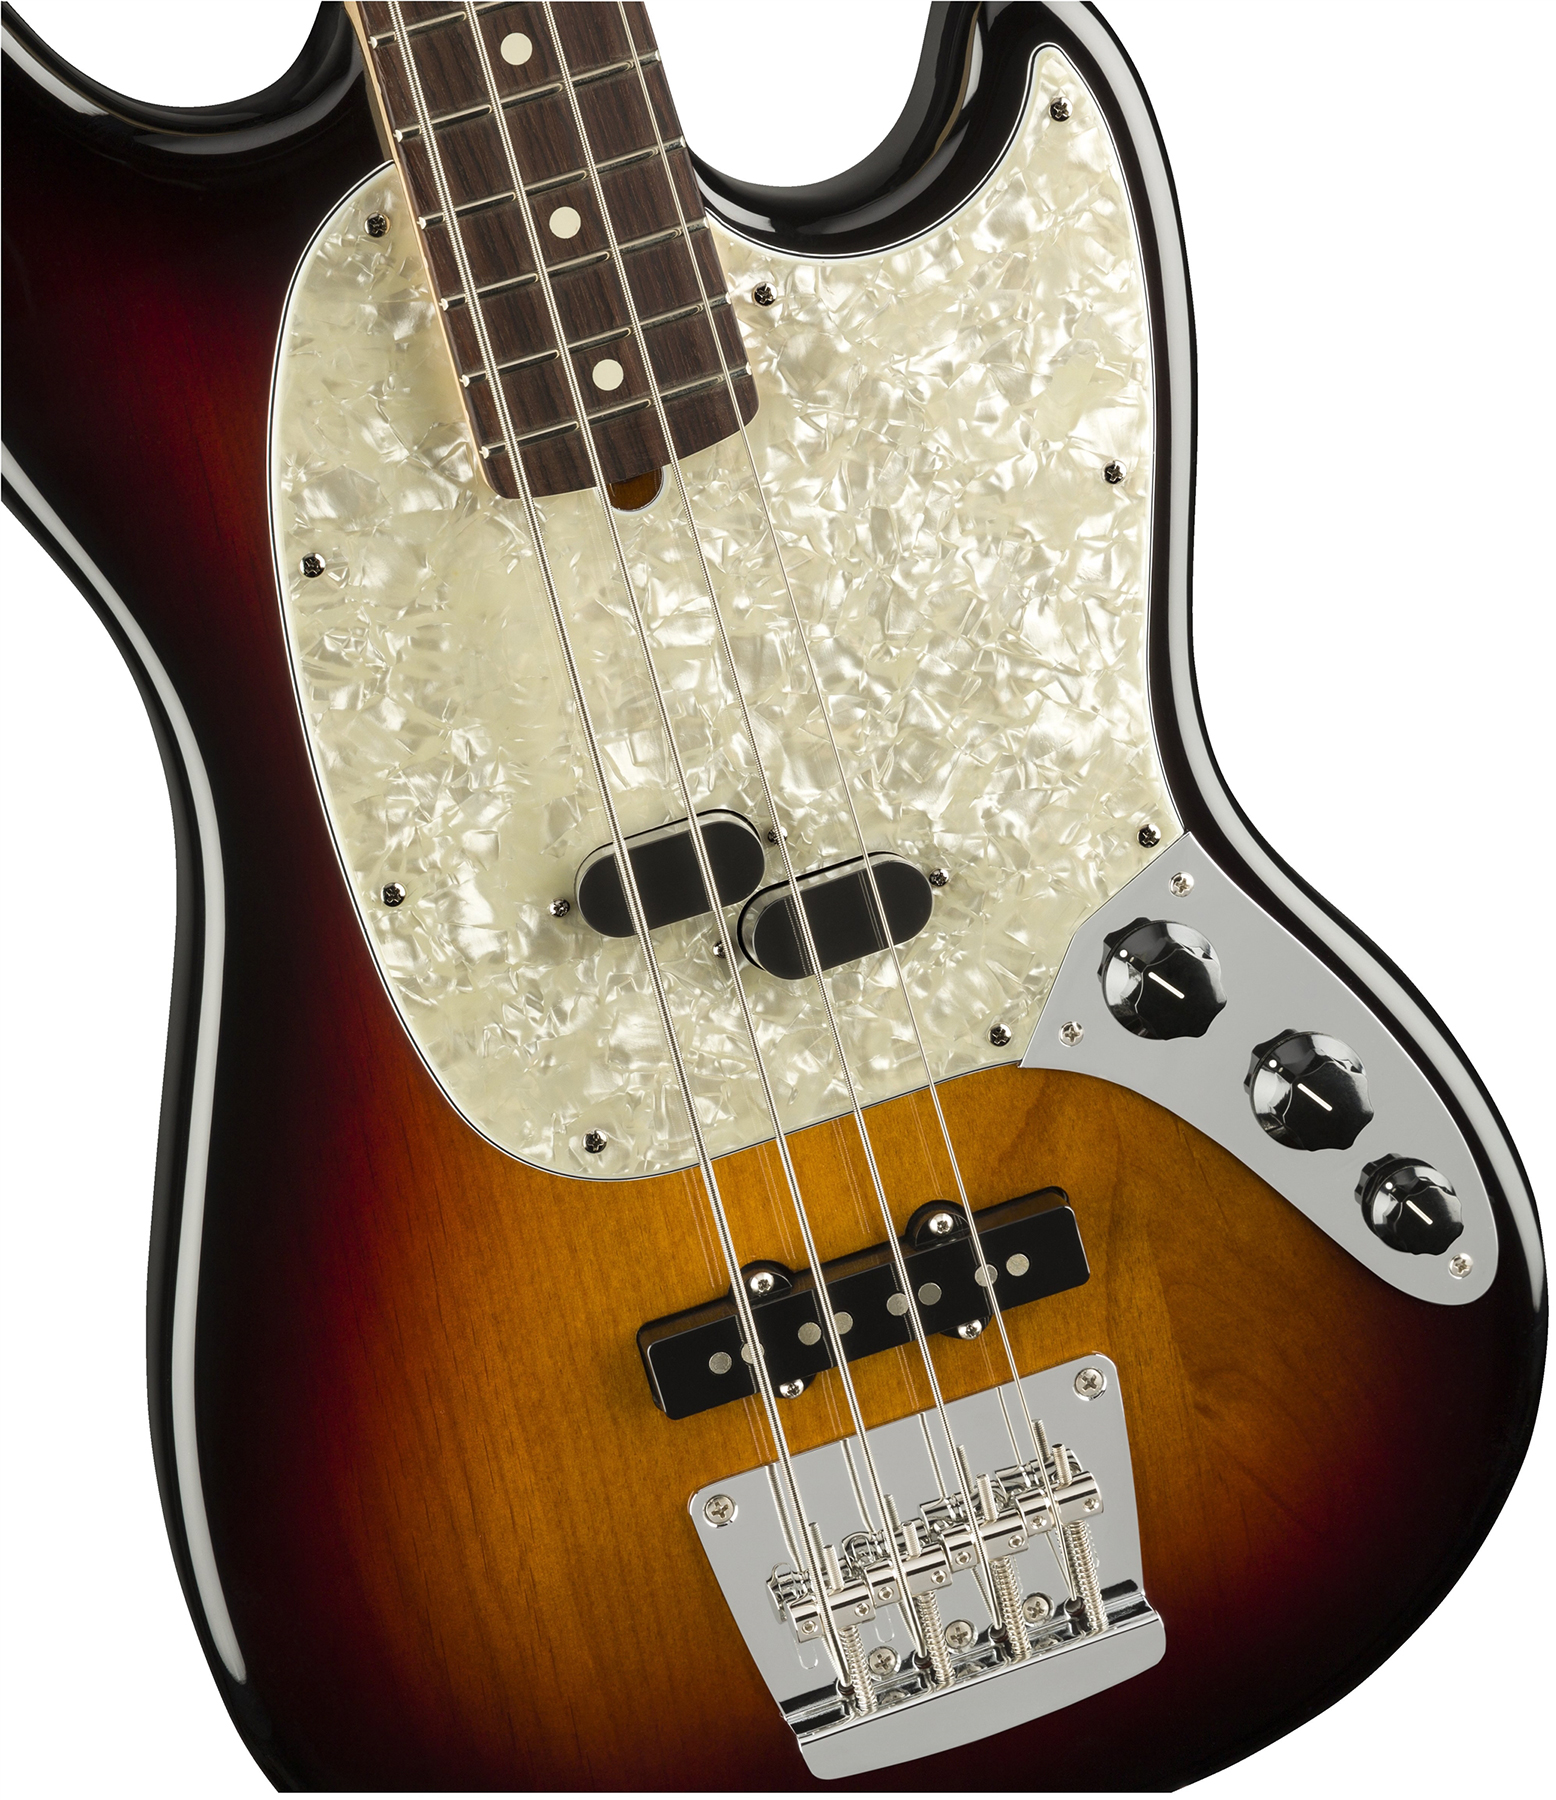 Fender Mustang Bass American Performer Usa Rw - 3-color Sunburst - Electric bass for kids - Variation 2